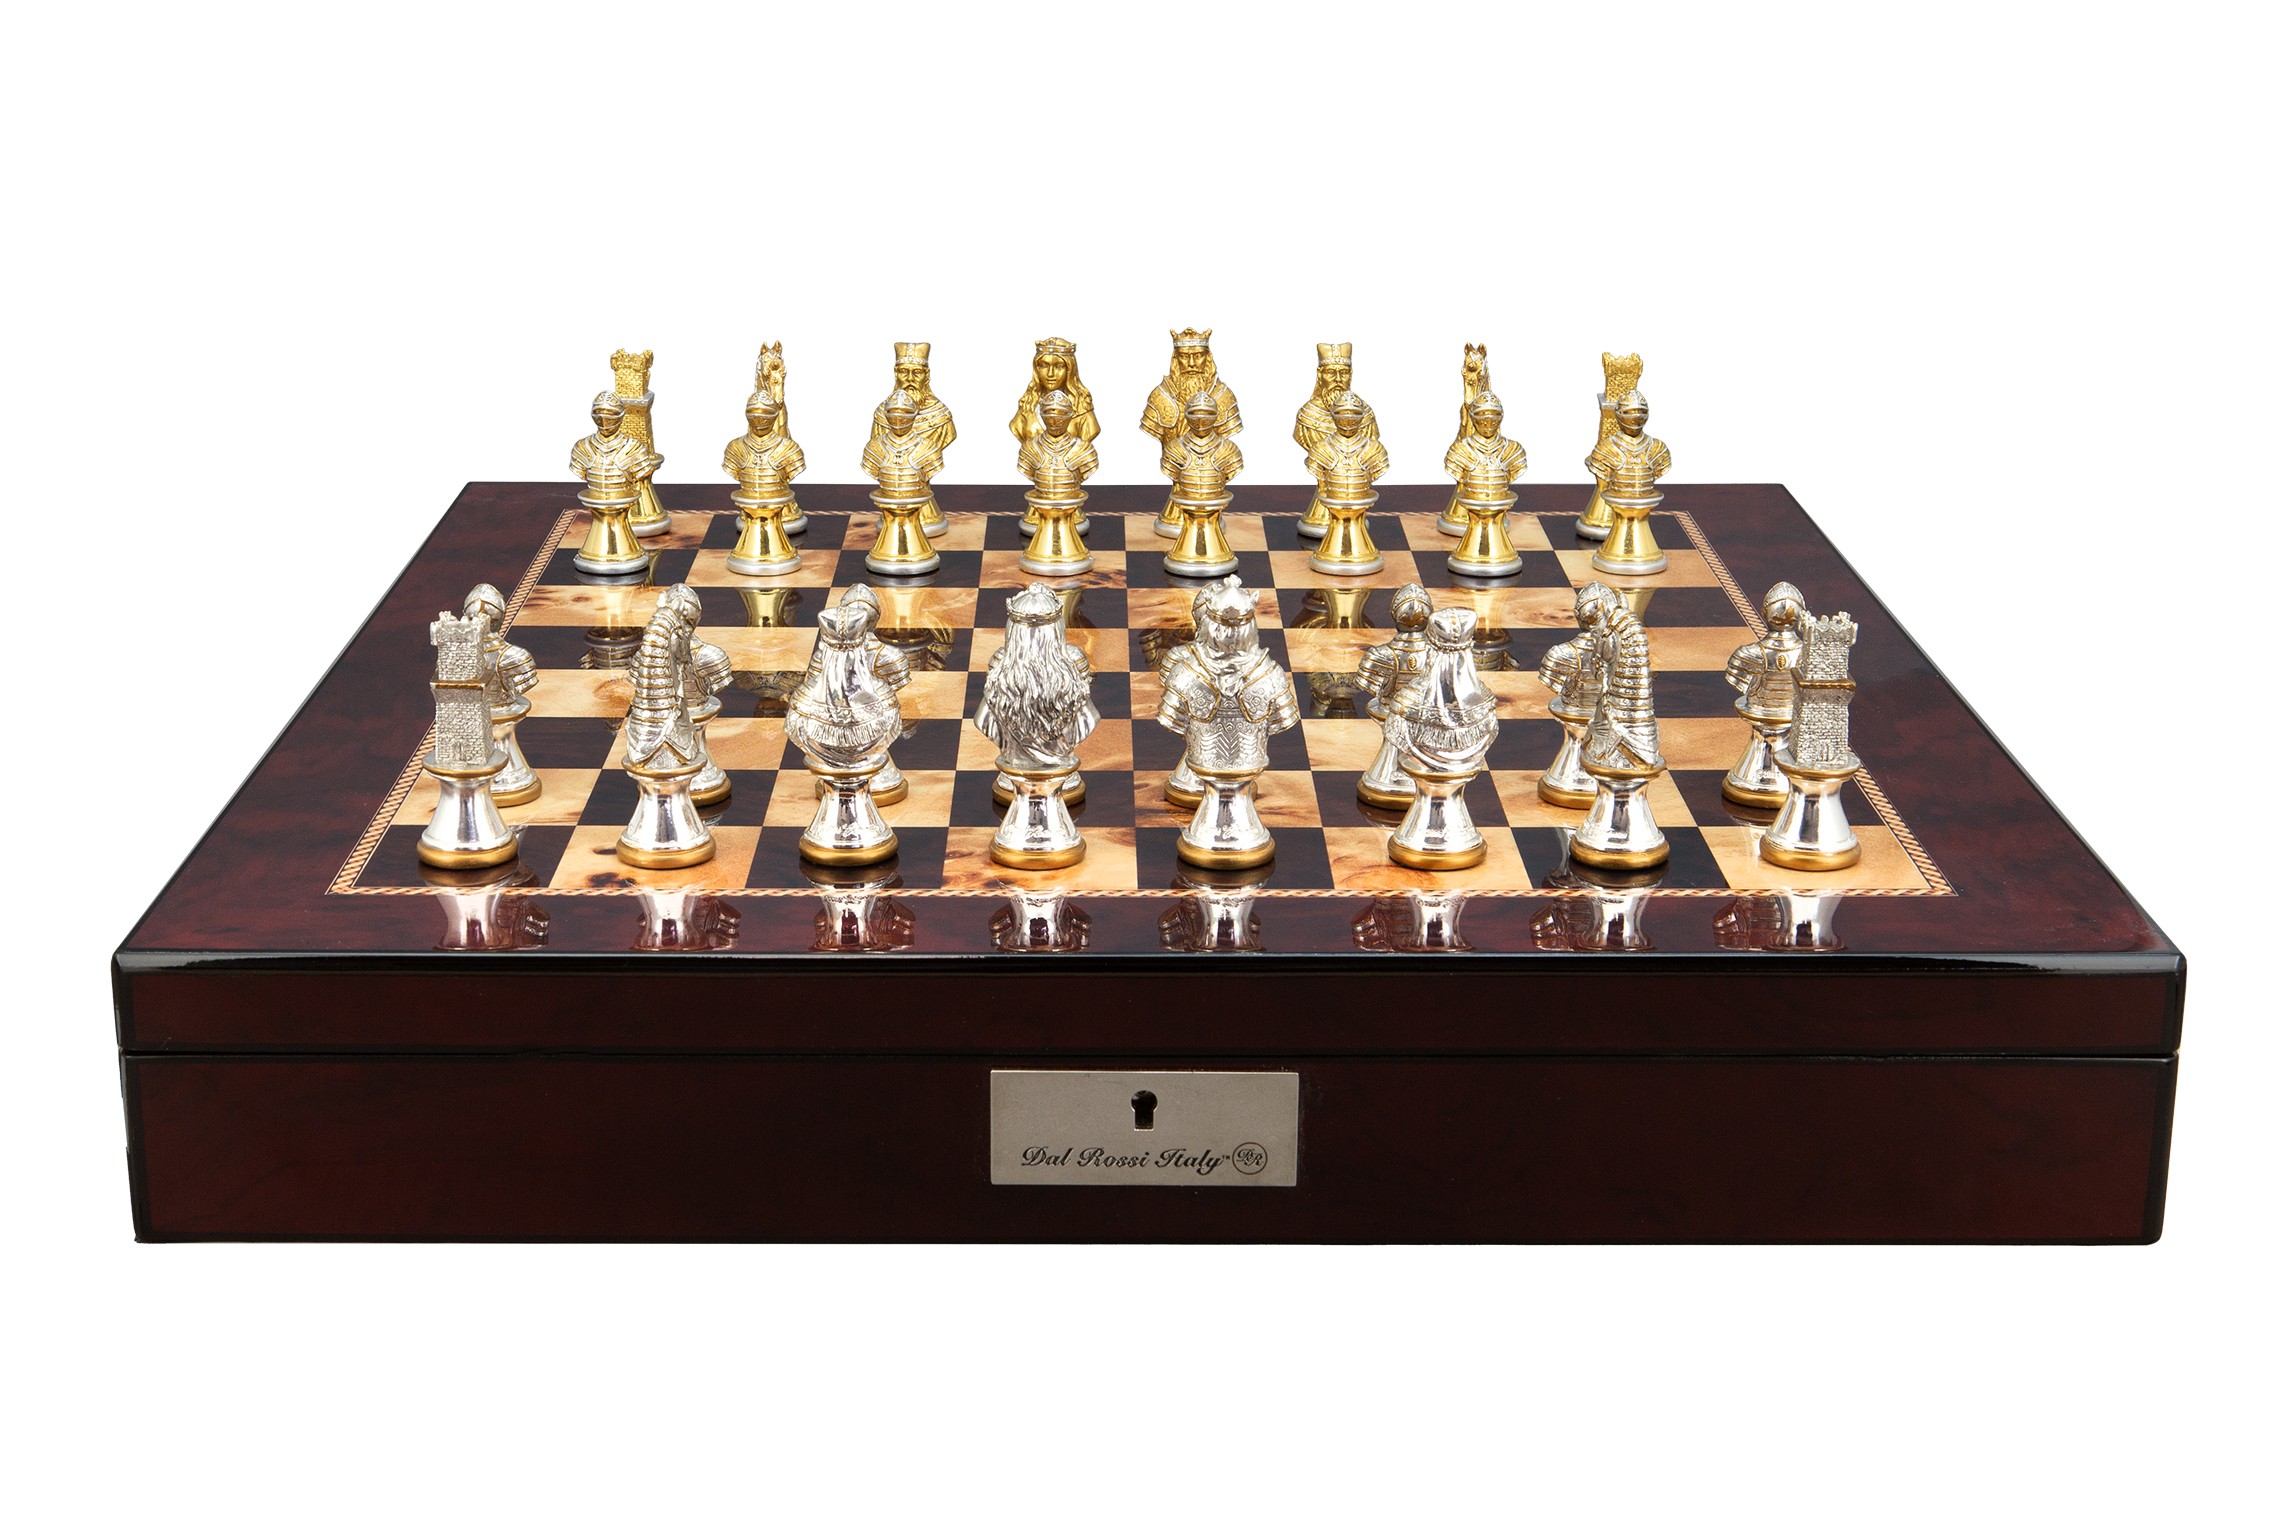 Dal Rossi Medieval Warriors Metal Chessmen 85mm on a Mahogany Finish Shiny Chess Box with Compartments 20"